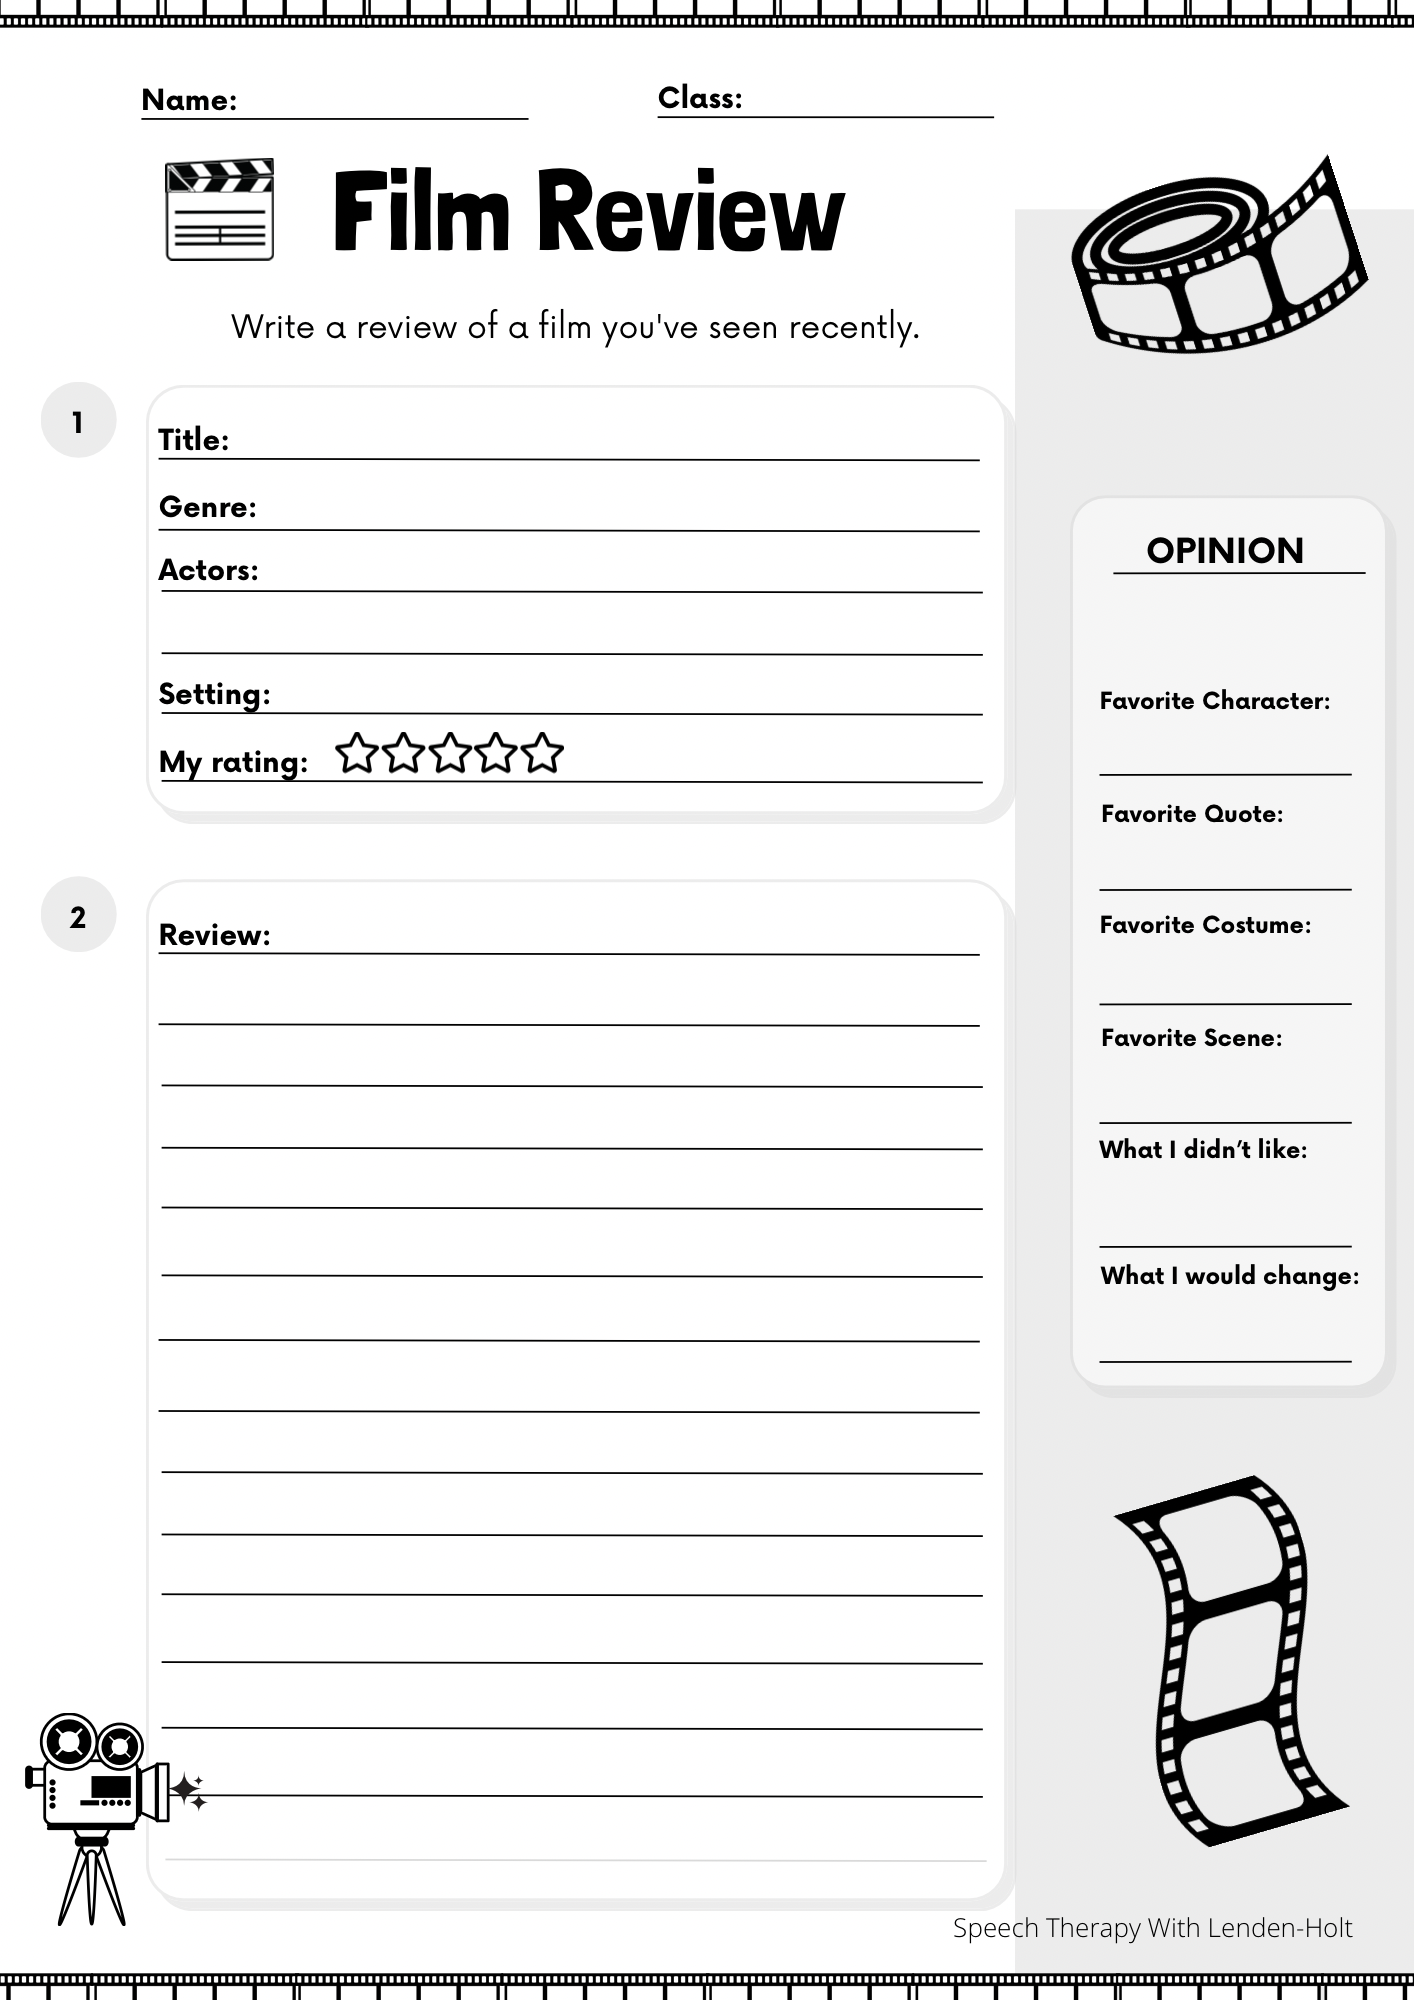 Film Movie Review Writing Prompts and Discussion image